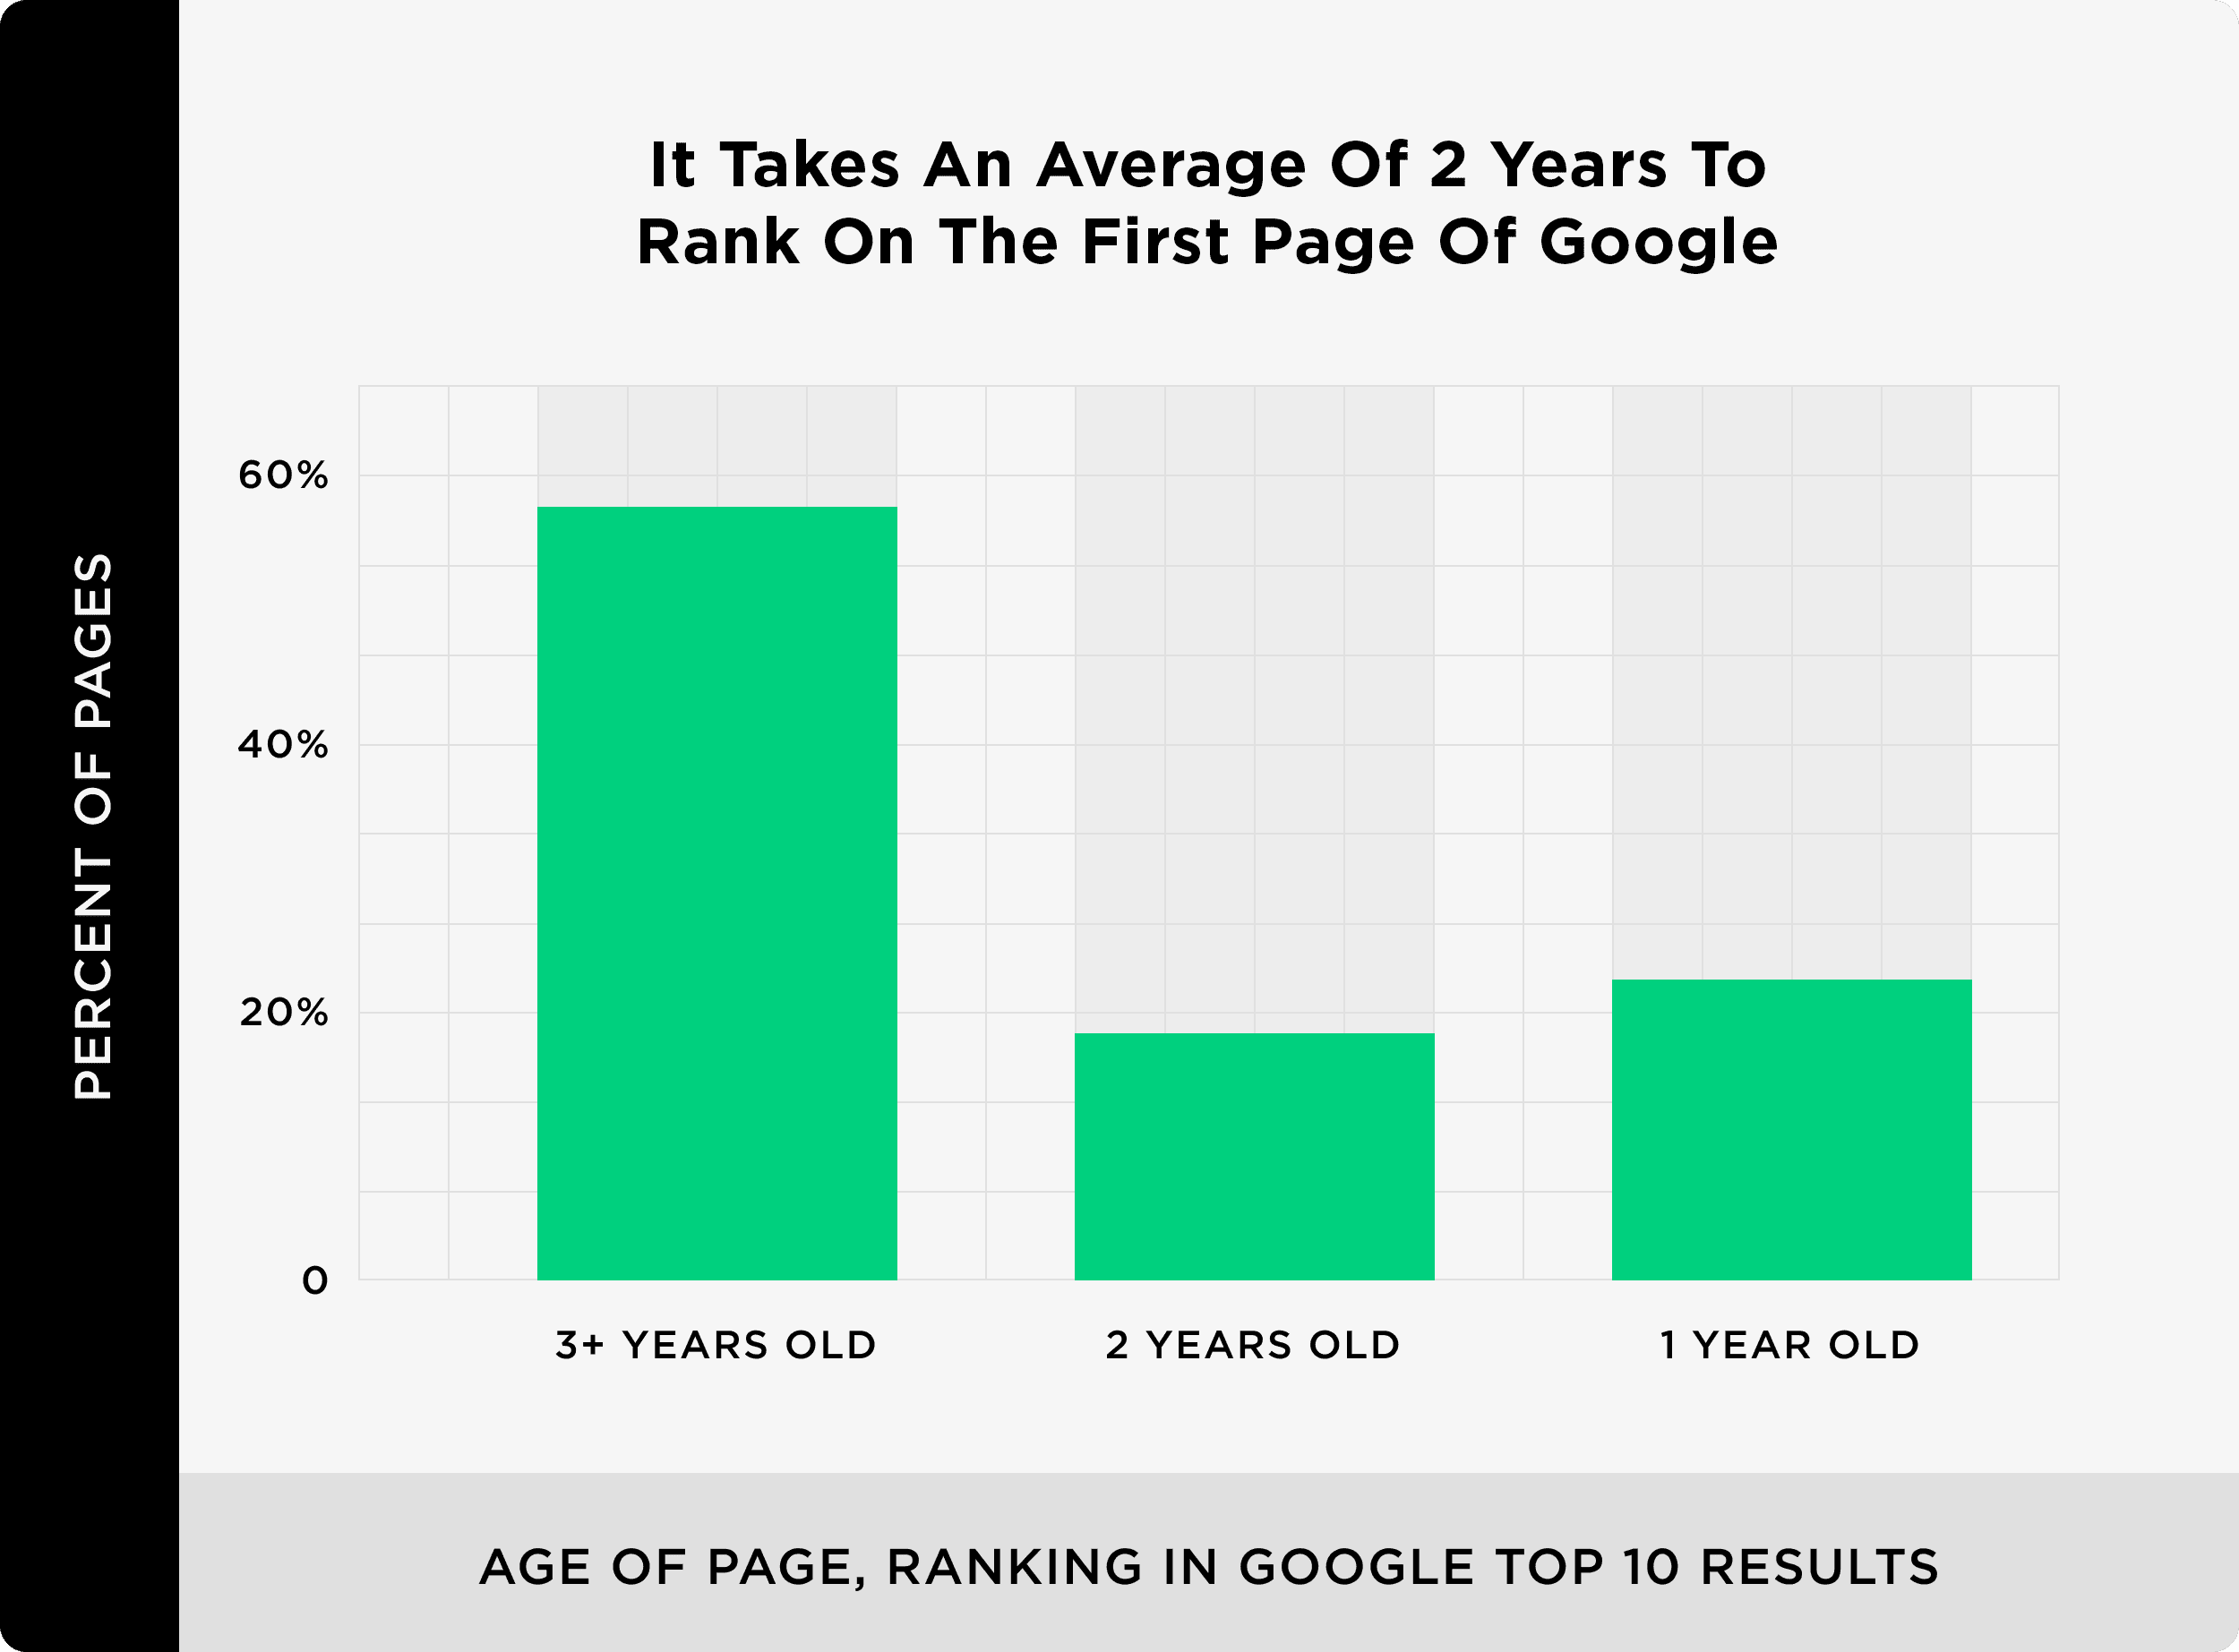 It takes an average of 2 years to rank on the first page of Google